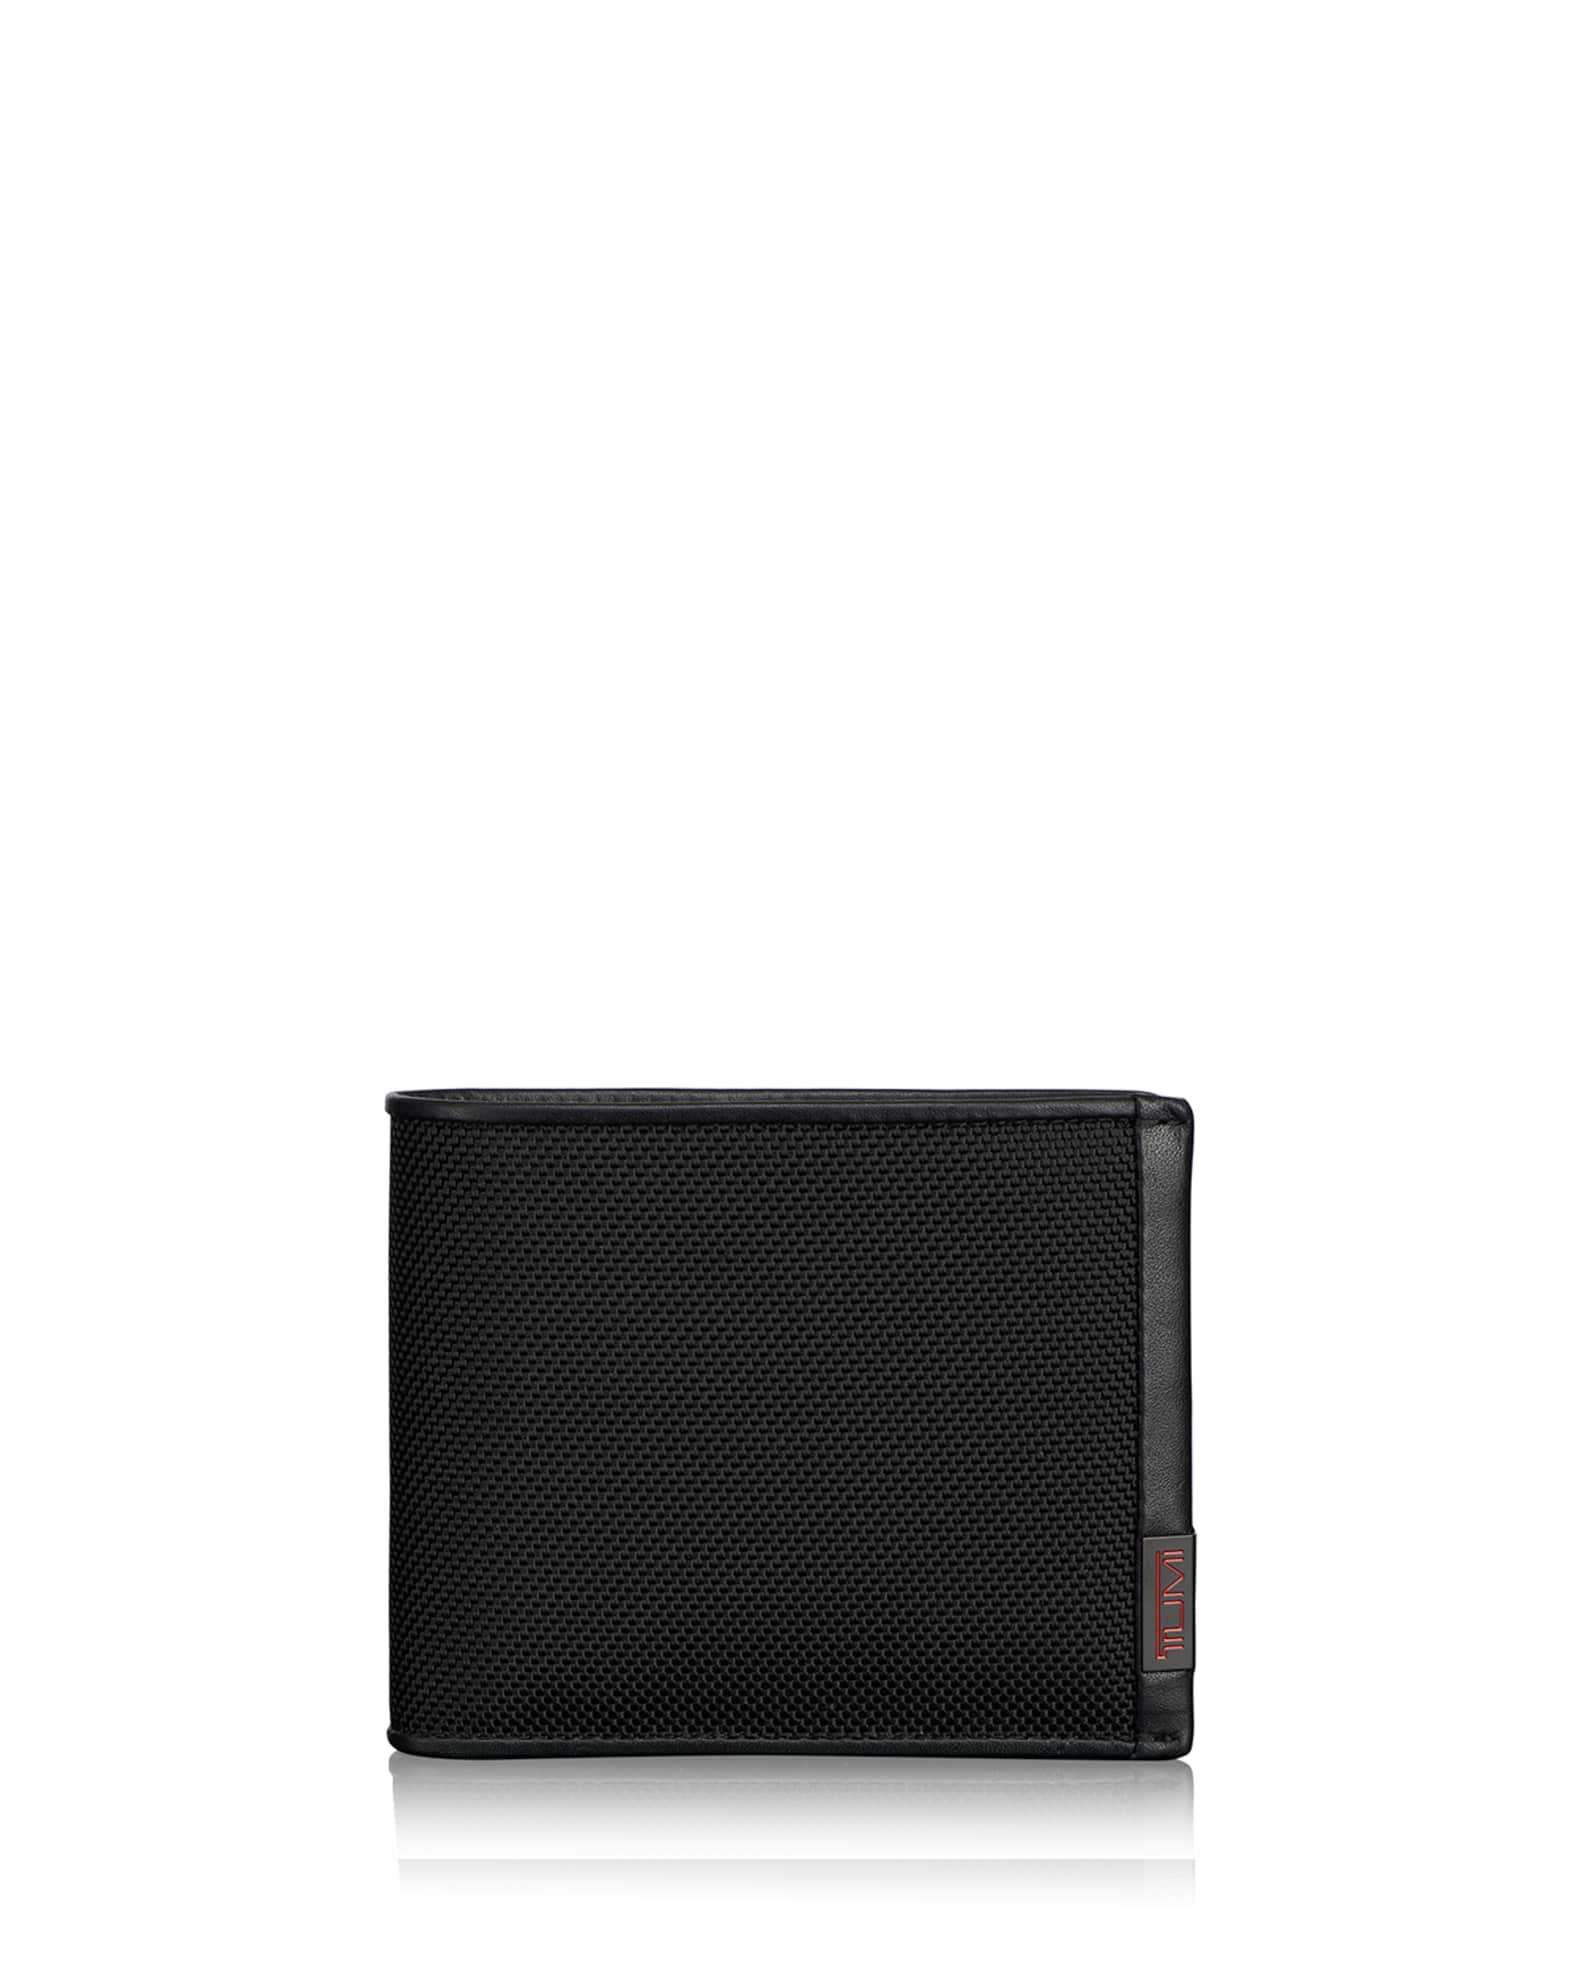 TUMI Alpha Global Removable Passcase Card Case